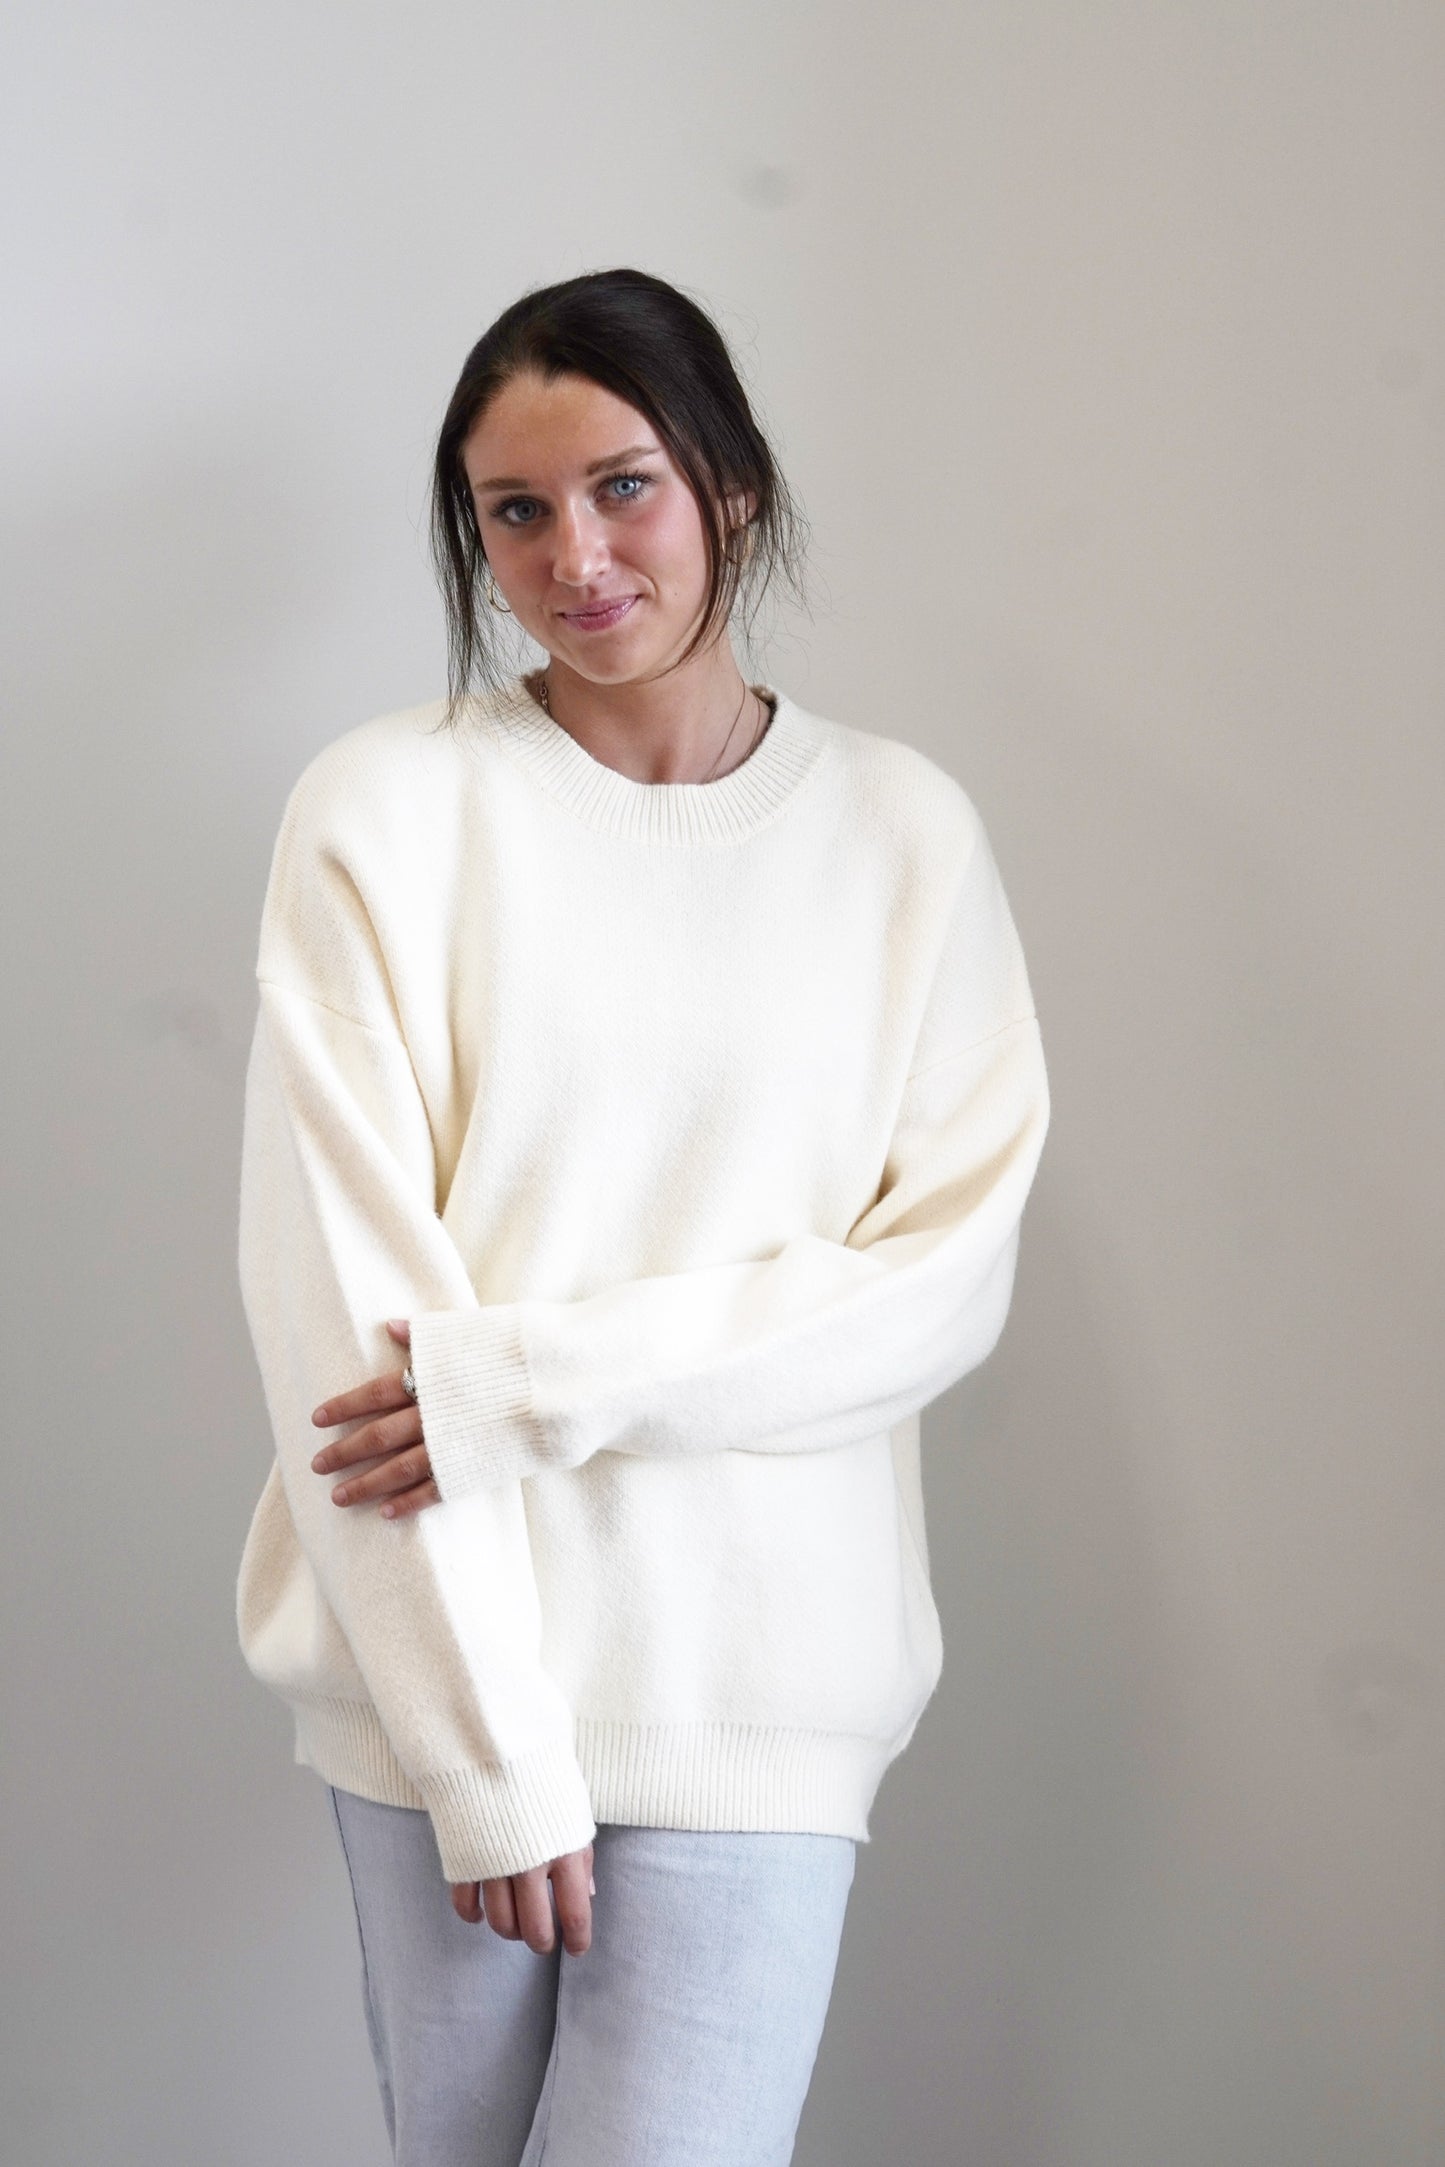 Snuggle Up Crew Sweater Crew Neckline Long Cuffed Sleeves Thick Knit Material Cream Color Relaxed Fit Gathered Knit Bottom Hem Full Length 52% Acrylic, 25% Nylon, 23% Polyester